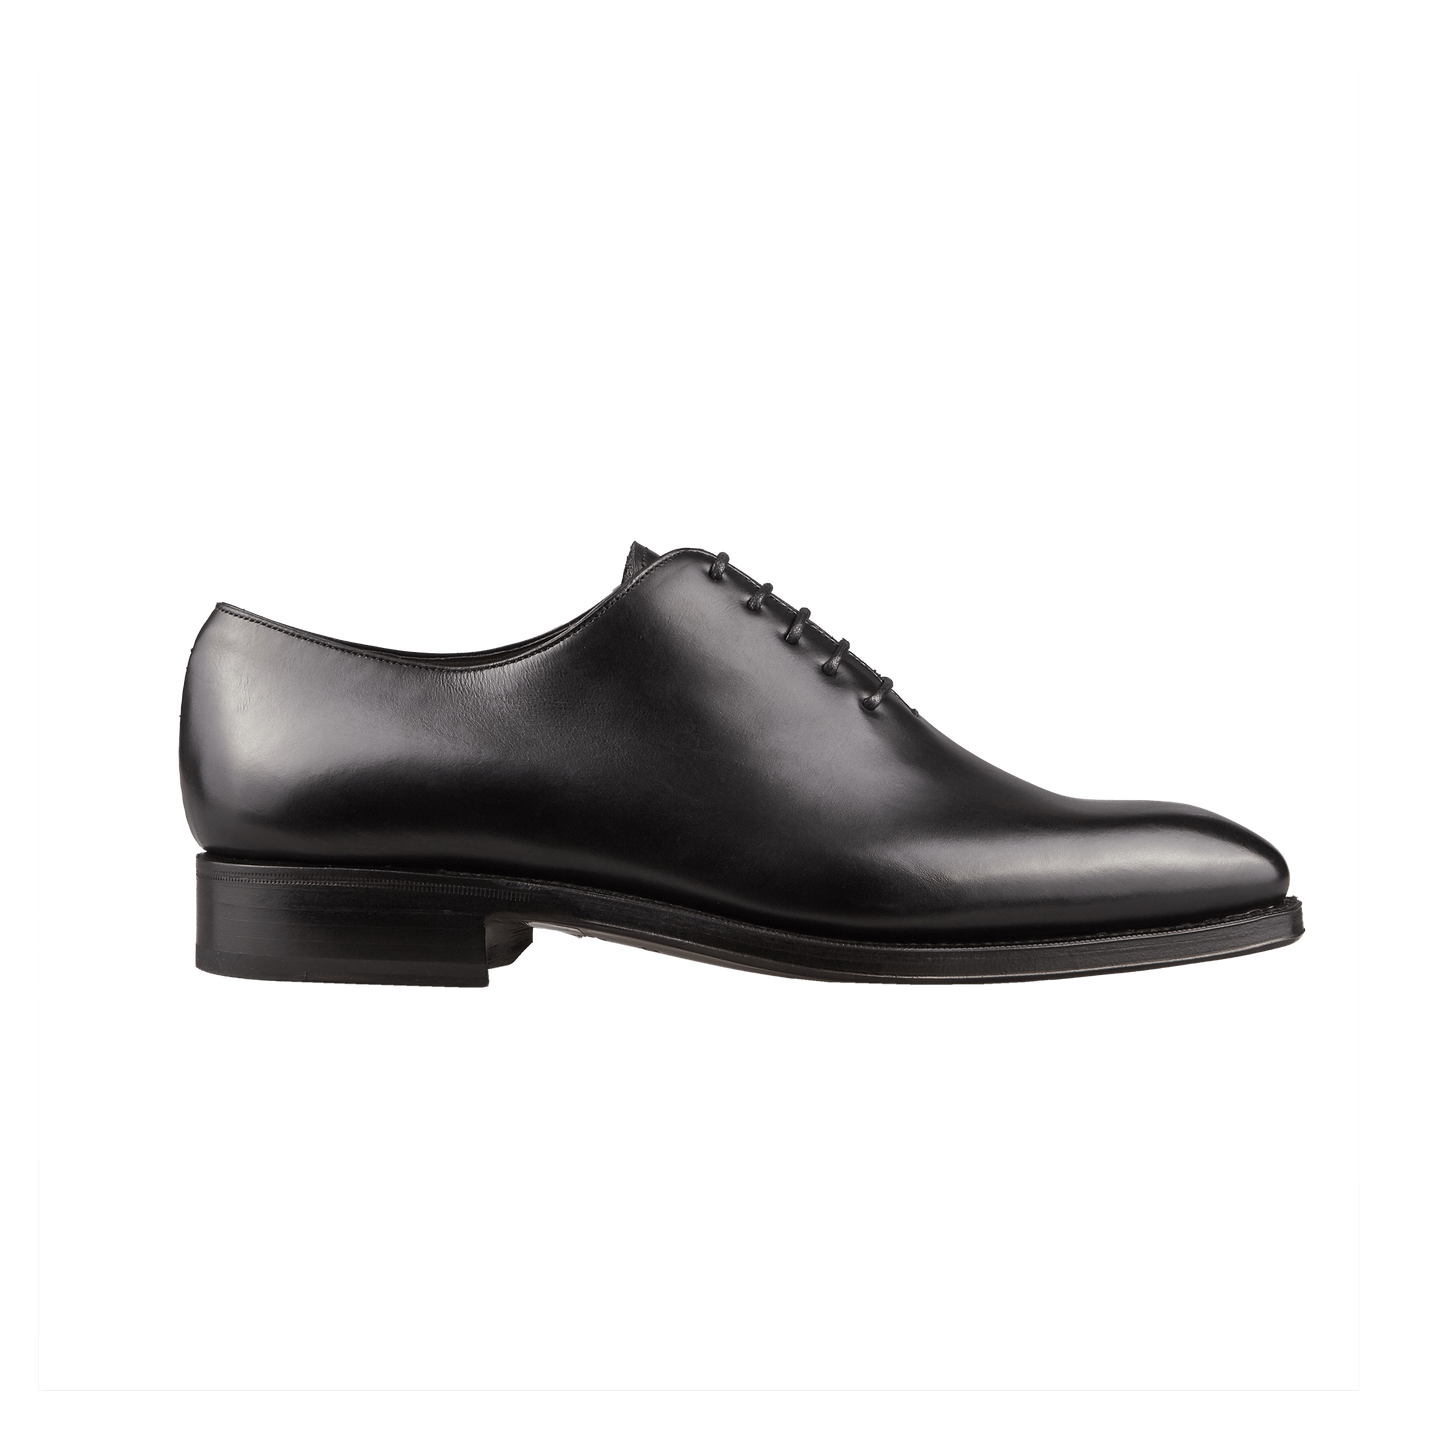 A classic and timeless pair of black oxfords. These Spanish black box-calf are made to last you for a lifetime.